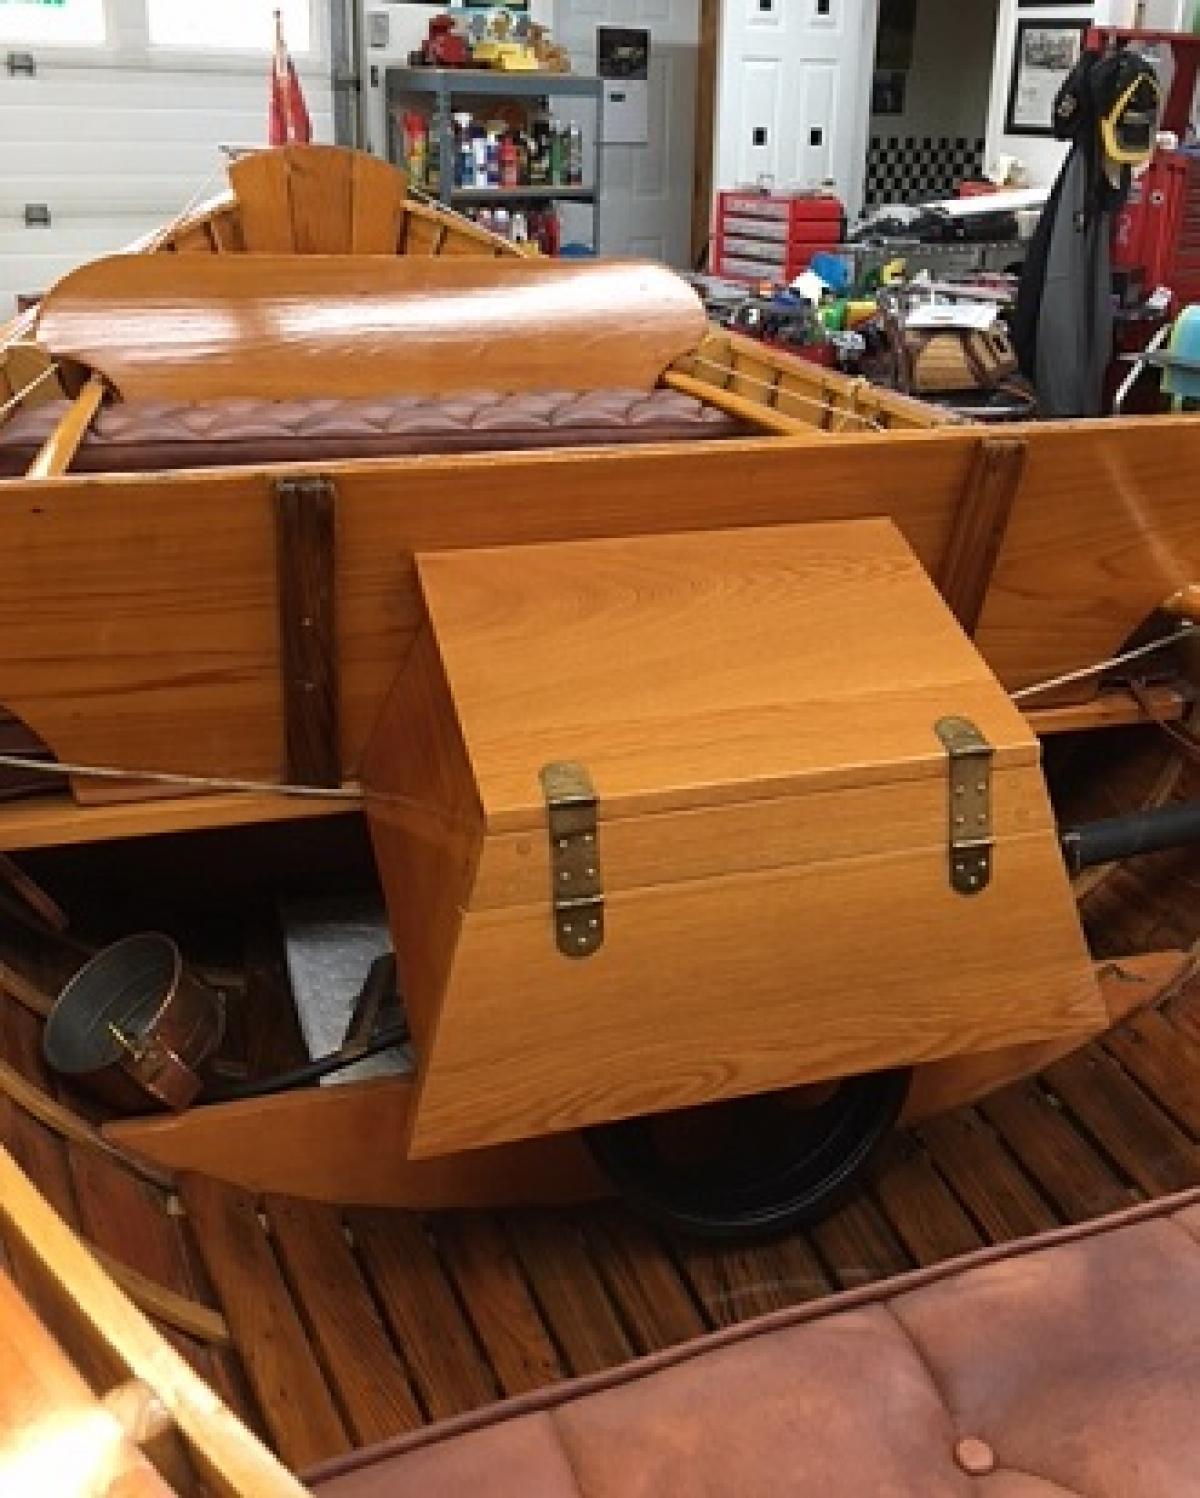 Classic Wooden Boat for Sale -  1921 DISPRO - DISAPPEARING PROPELLER BOAT